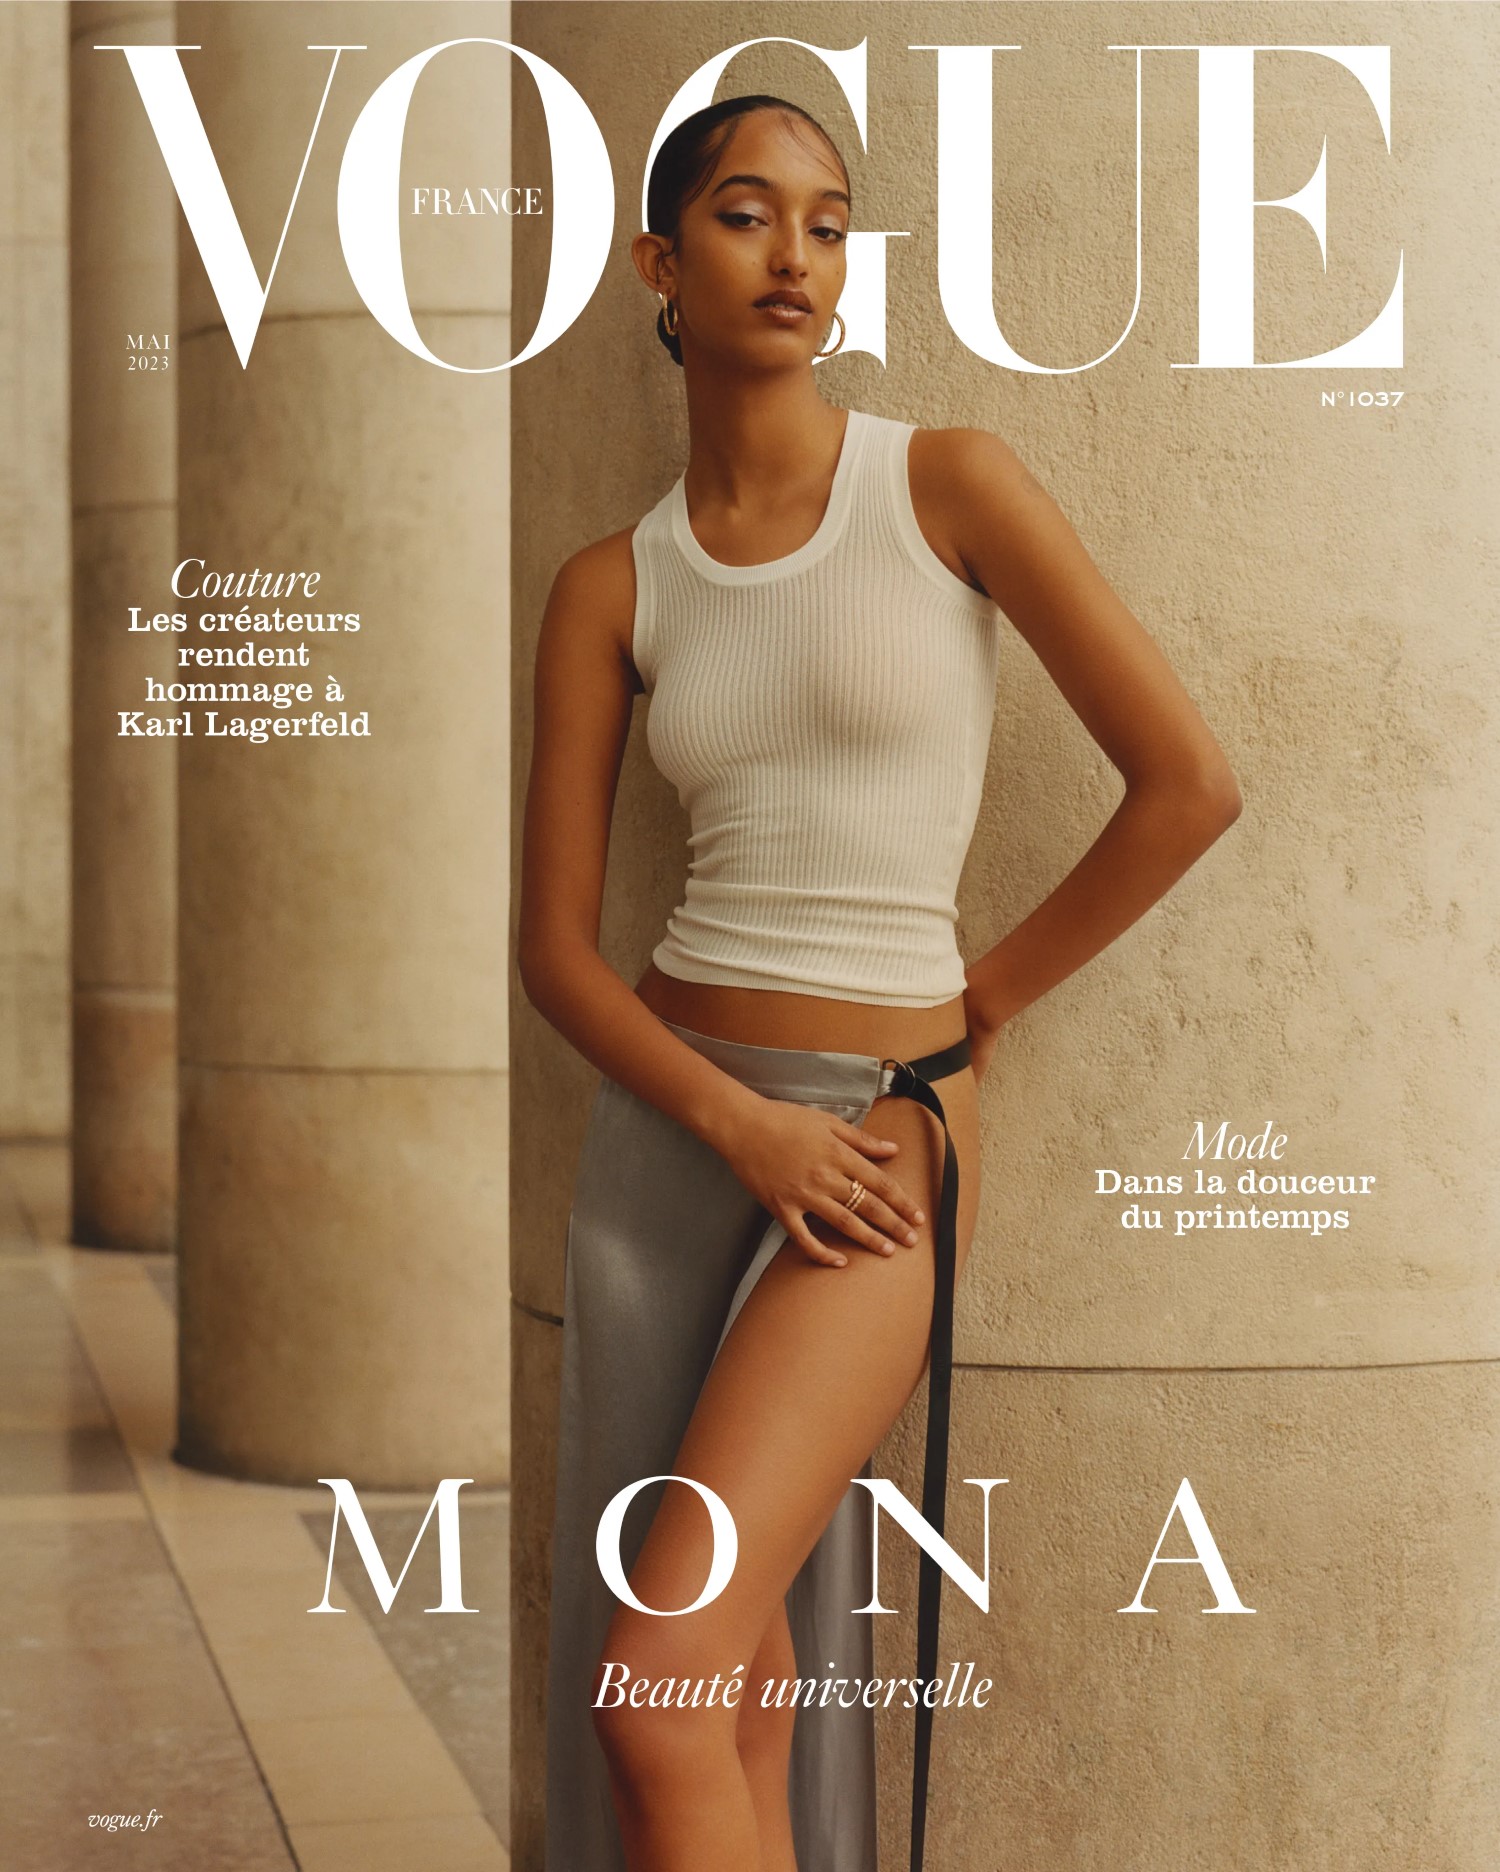 Mona Tougaard covers Vogue France May 2023 by Théo de Gueltzl